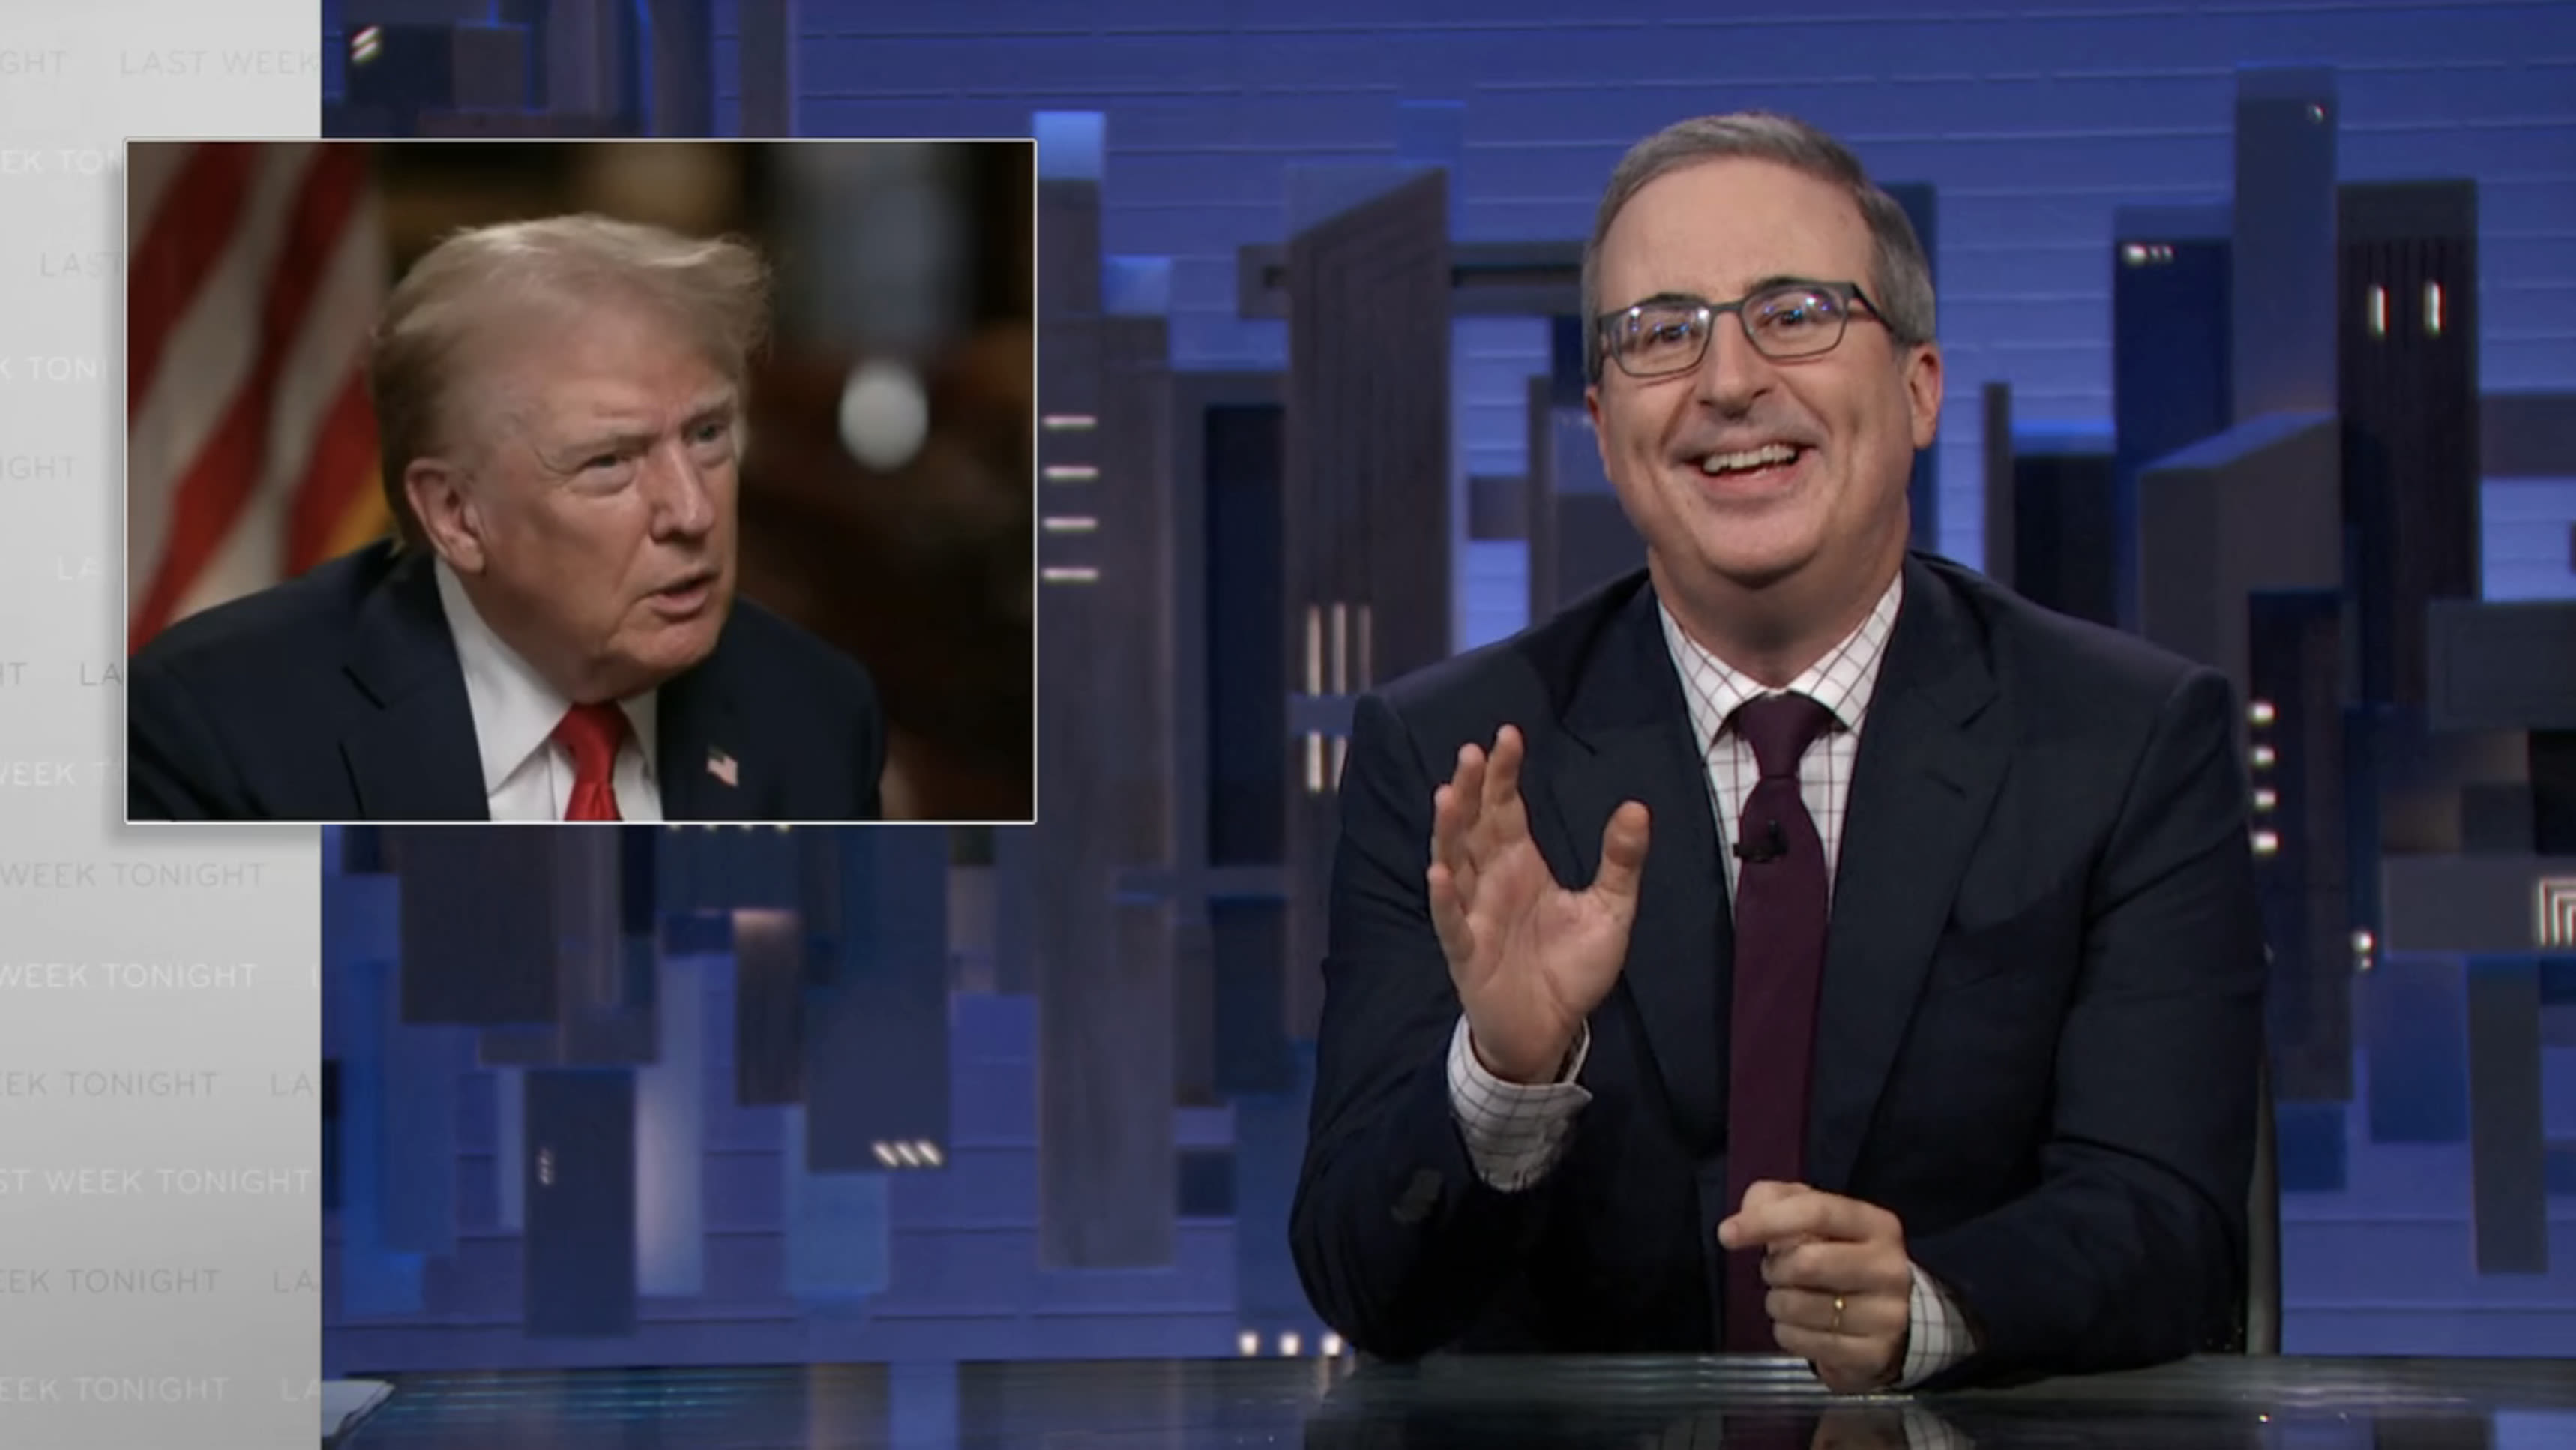 ‘Last Week Tonight’: John Oliver Says He “Didn’t Know” Donald Trump Was Christian Following Olympic Opening...